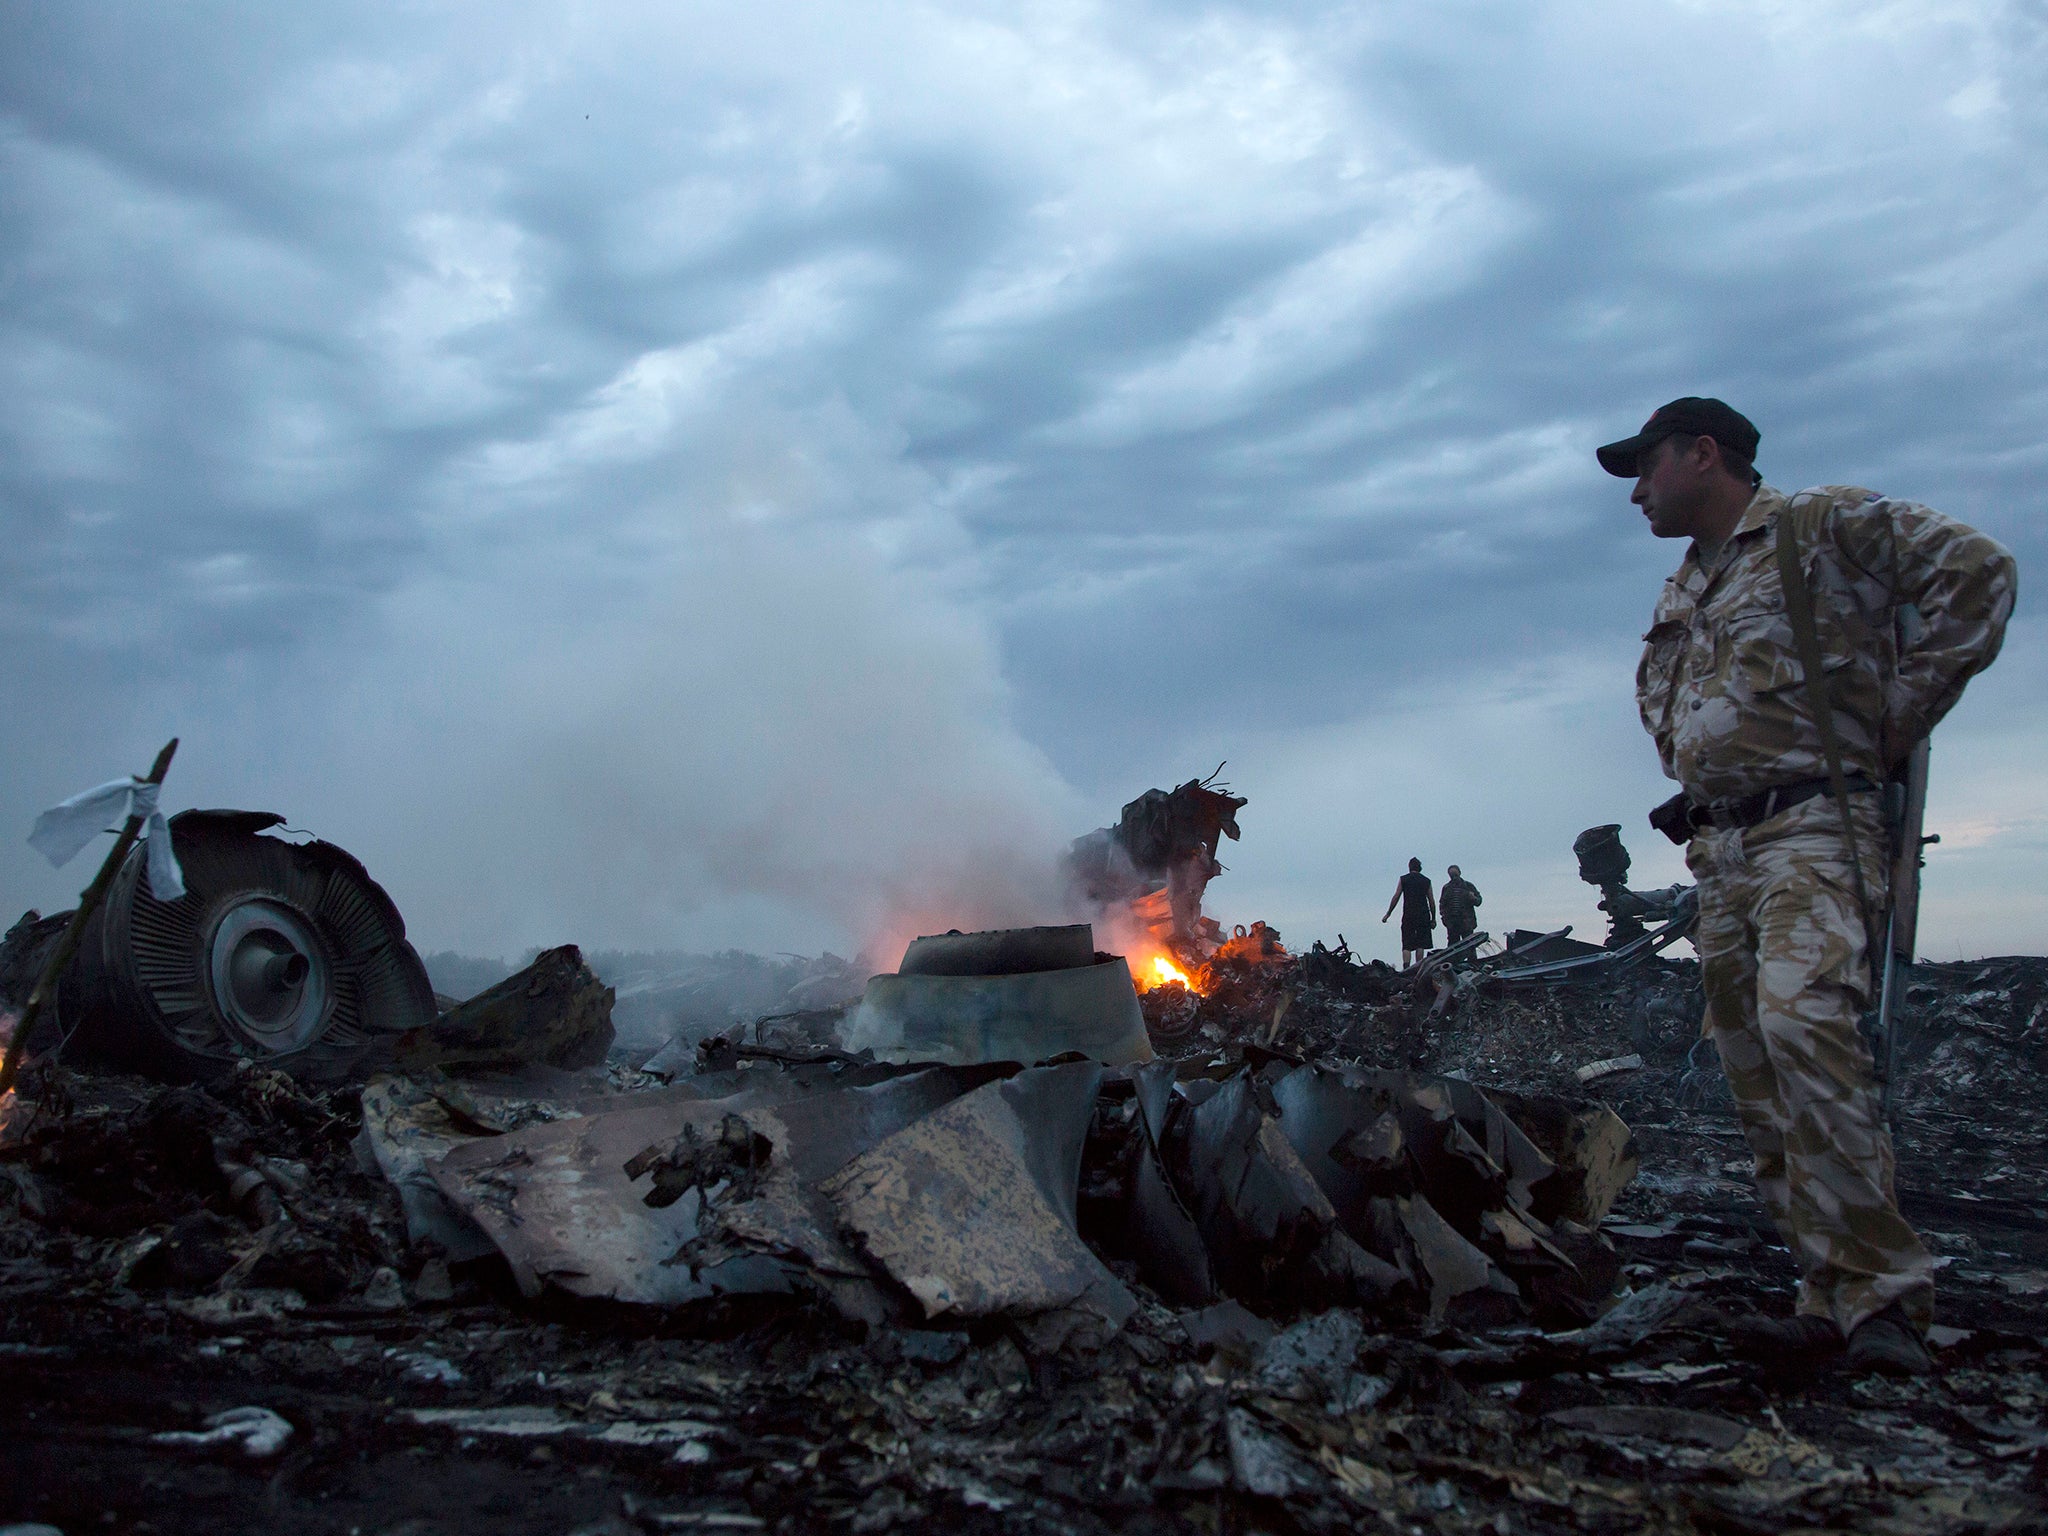 Flight MH17 crashed on 17 July last year, killing all 298 people on board